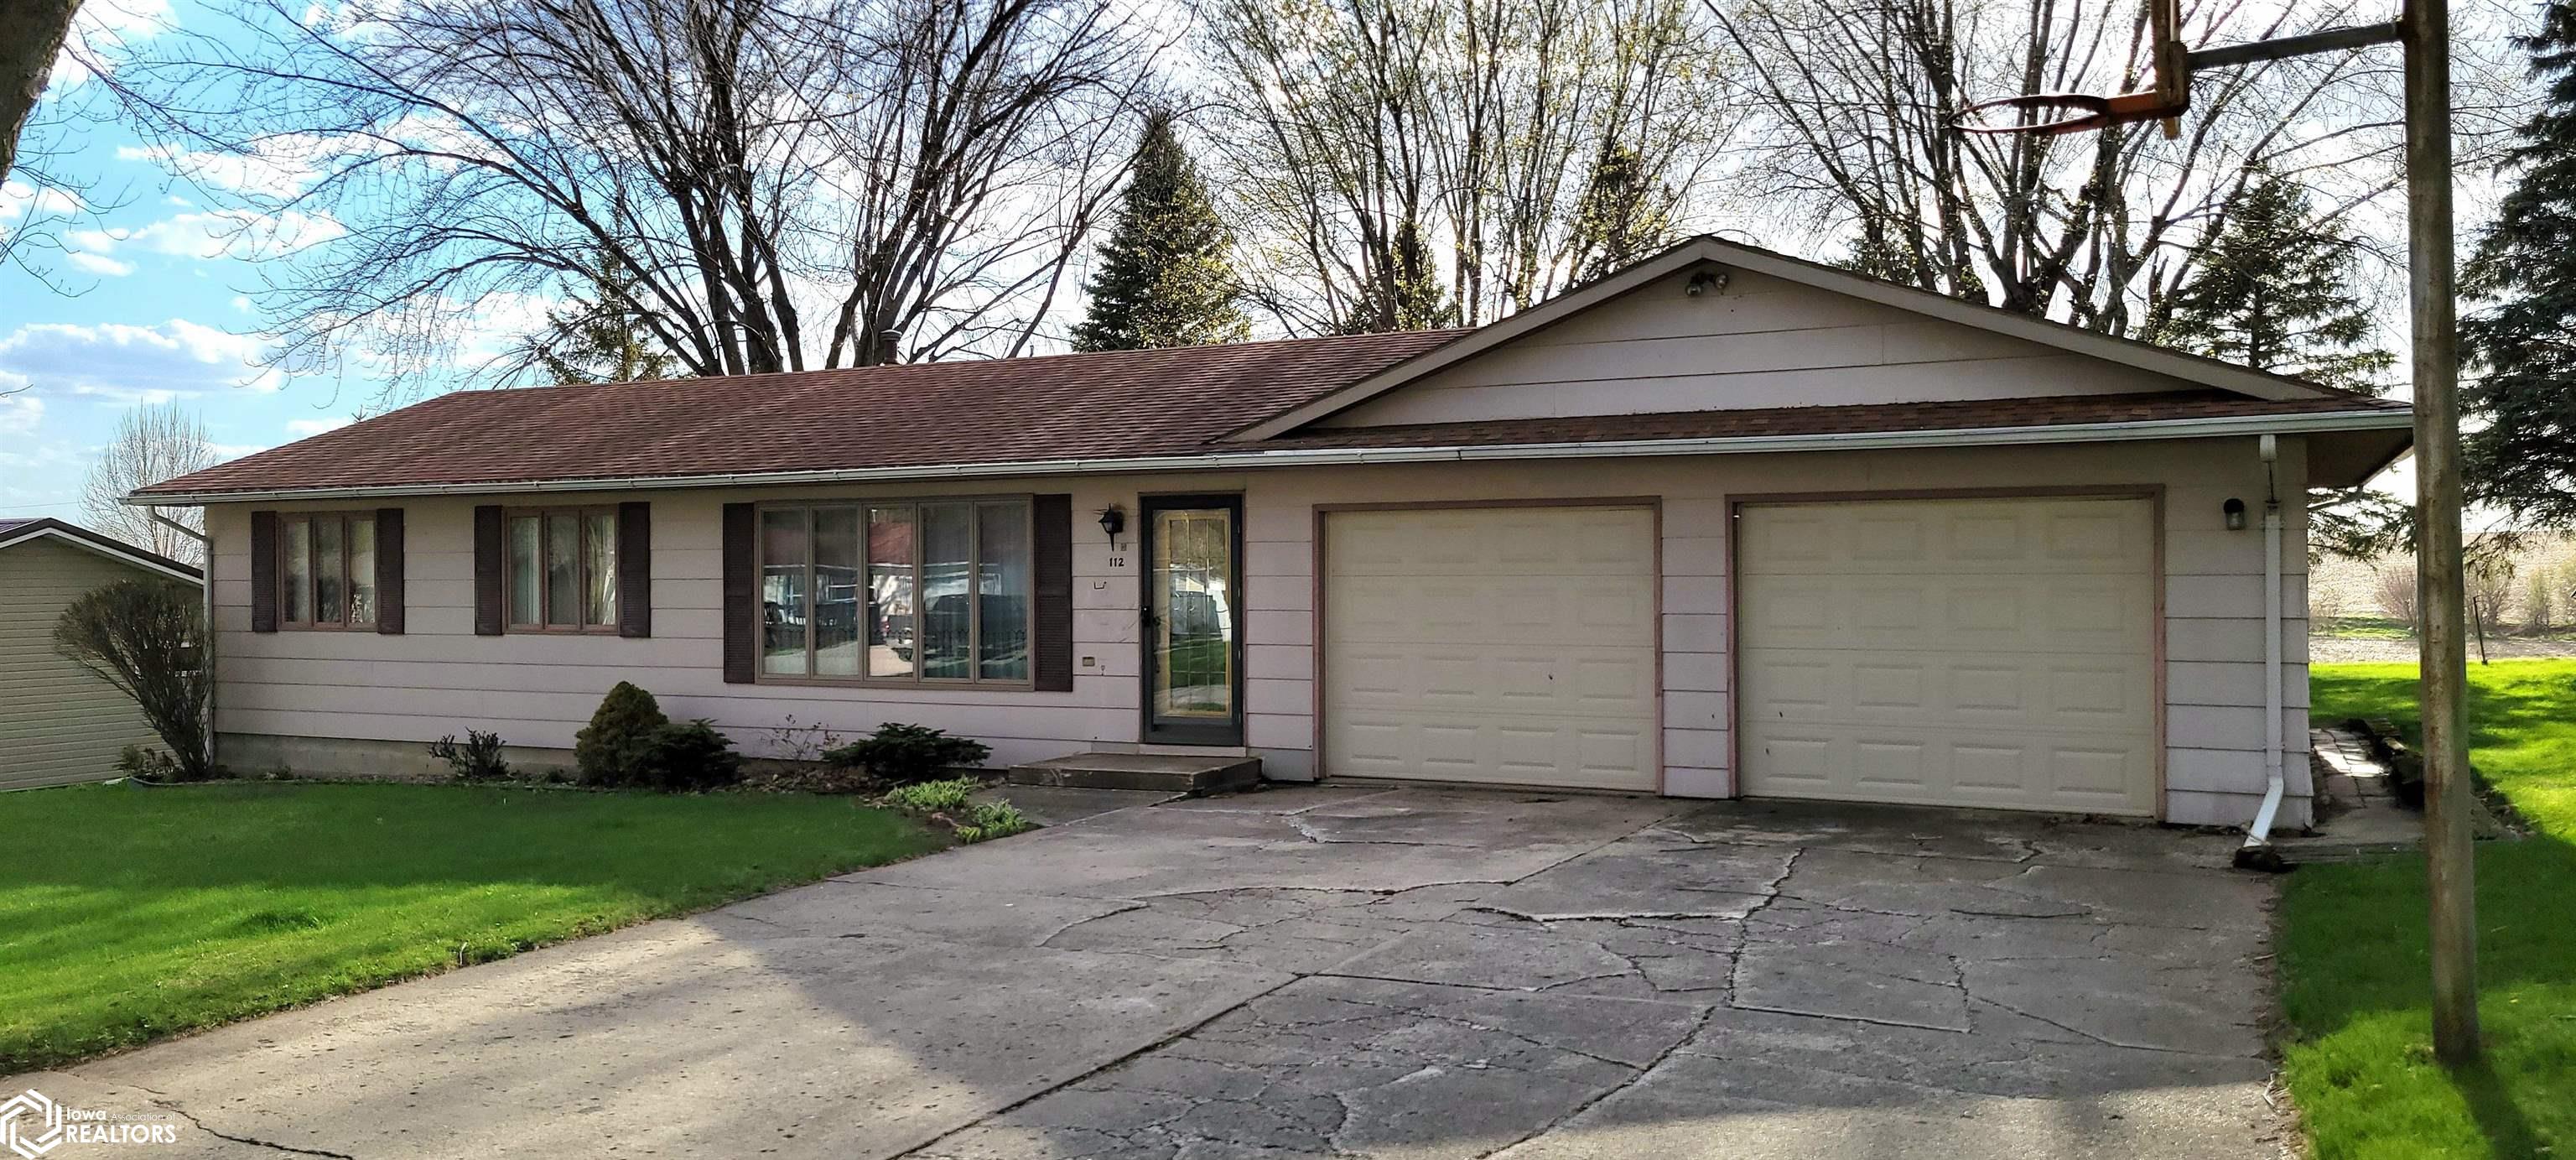 112 Lime, Kiron, Iowa 51448, 3 Bedrooms Bedrooms, ,1 BathroomBathrooms,Single Family,For Sale,Lime,6316717